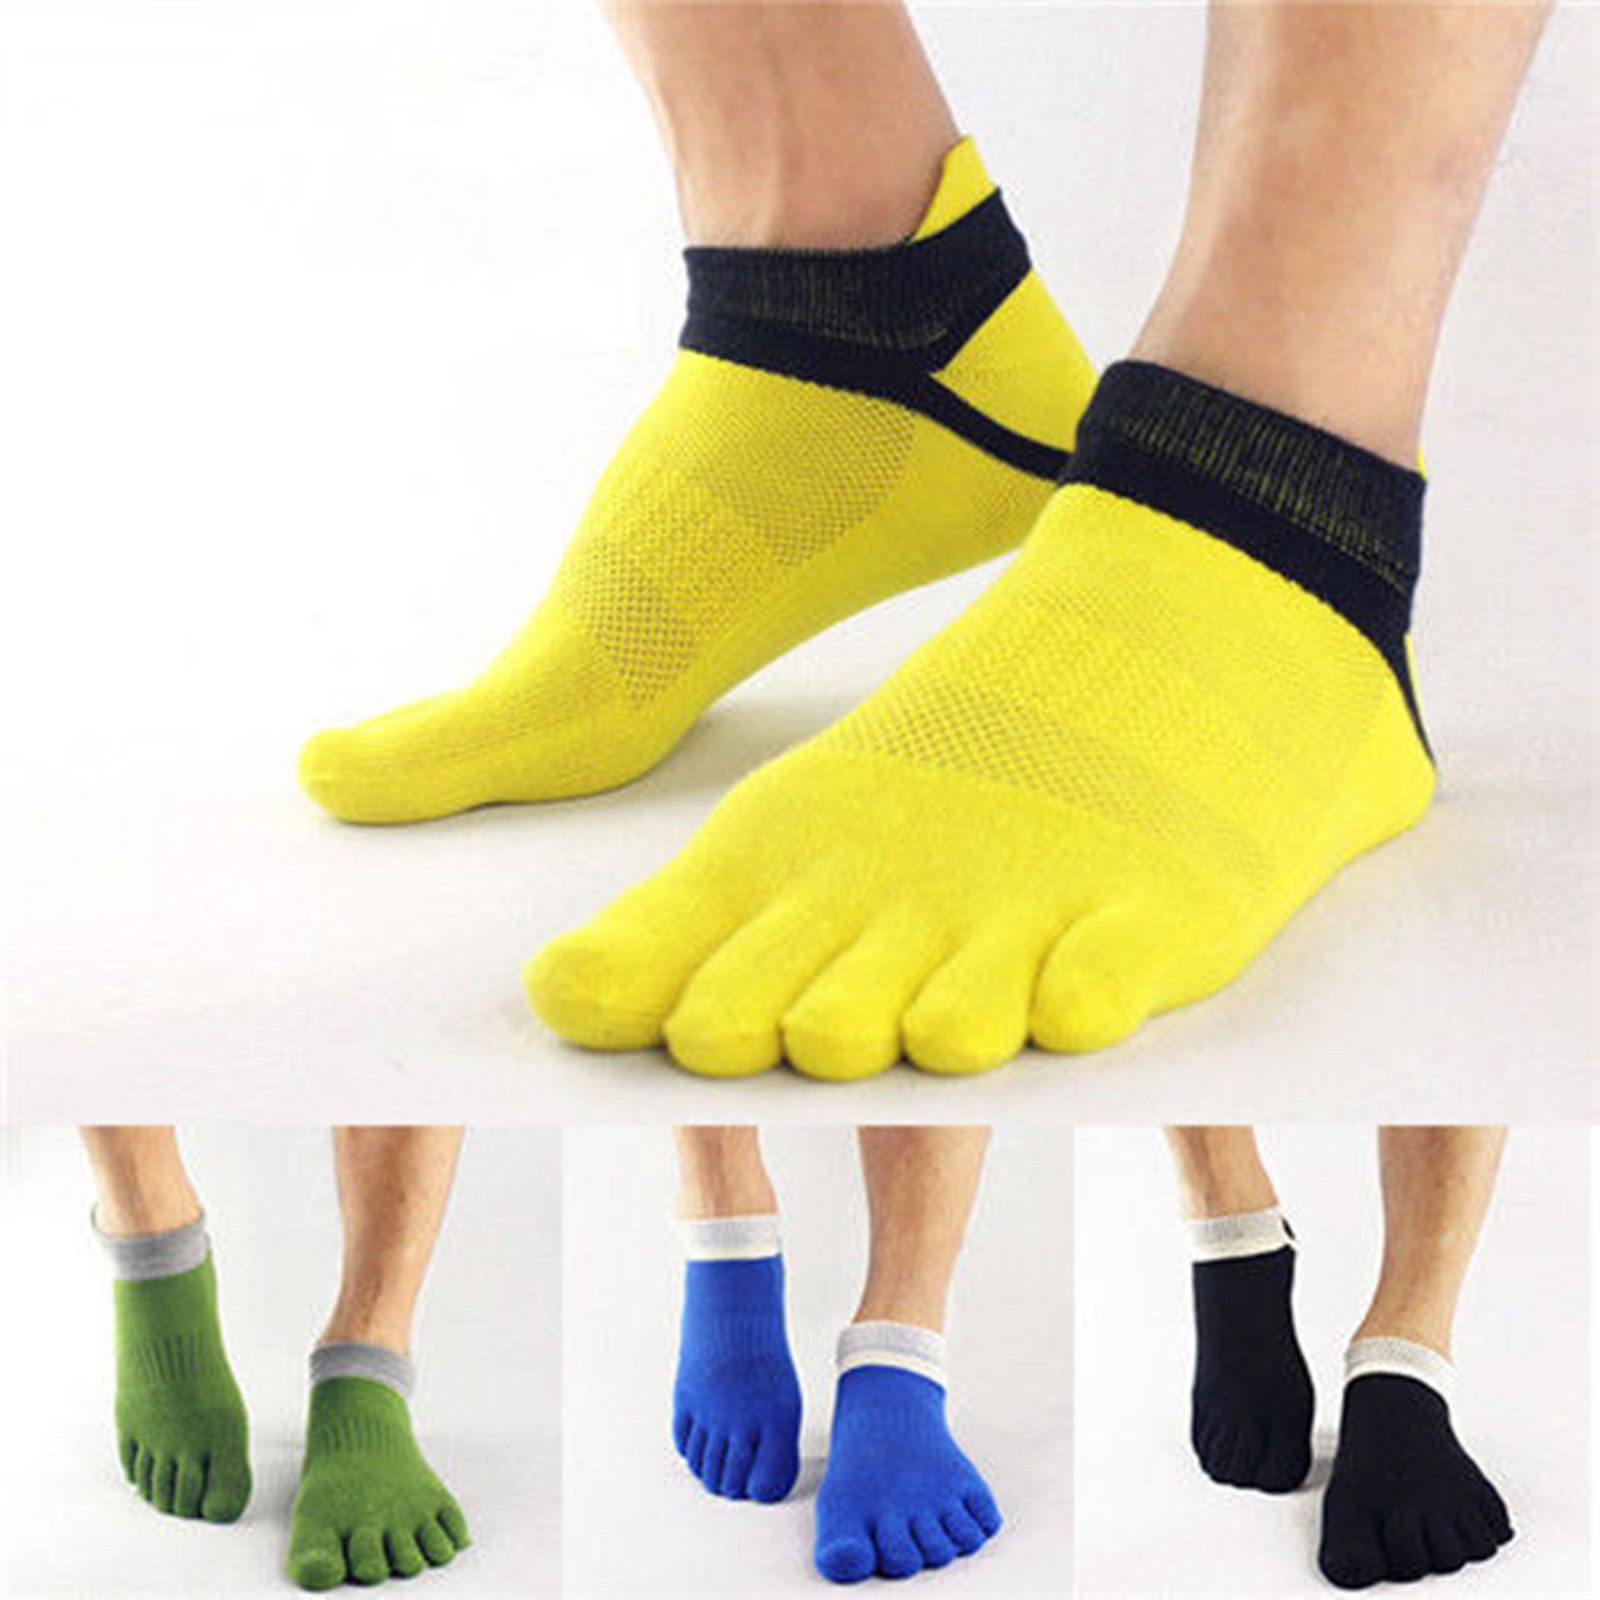 

1 Pair Of Men's Five-toe Ankle Socks Comfy Breathable Athletic Socks For Running, Cycling, Hiking, Fitness And Outdoor Activities